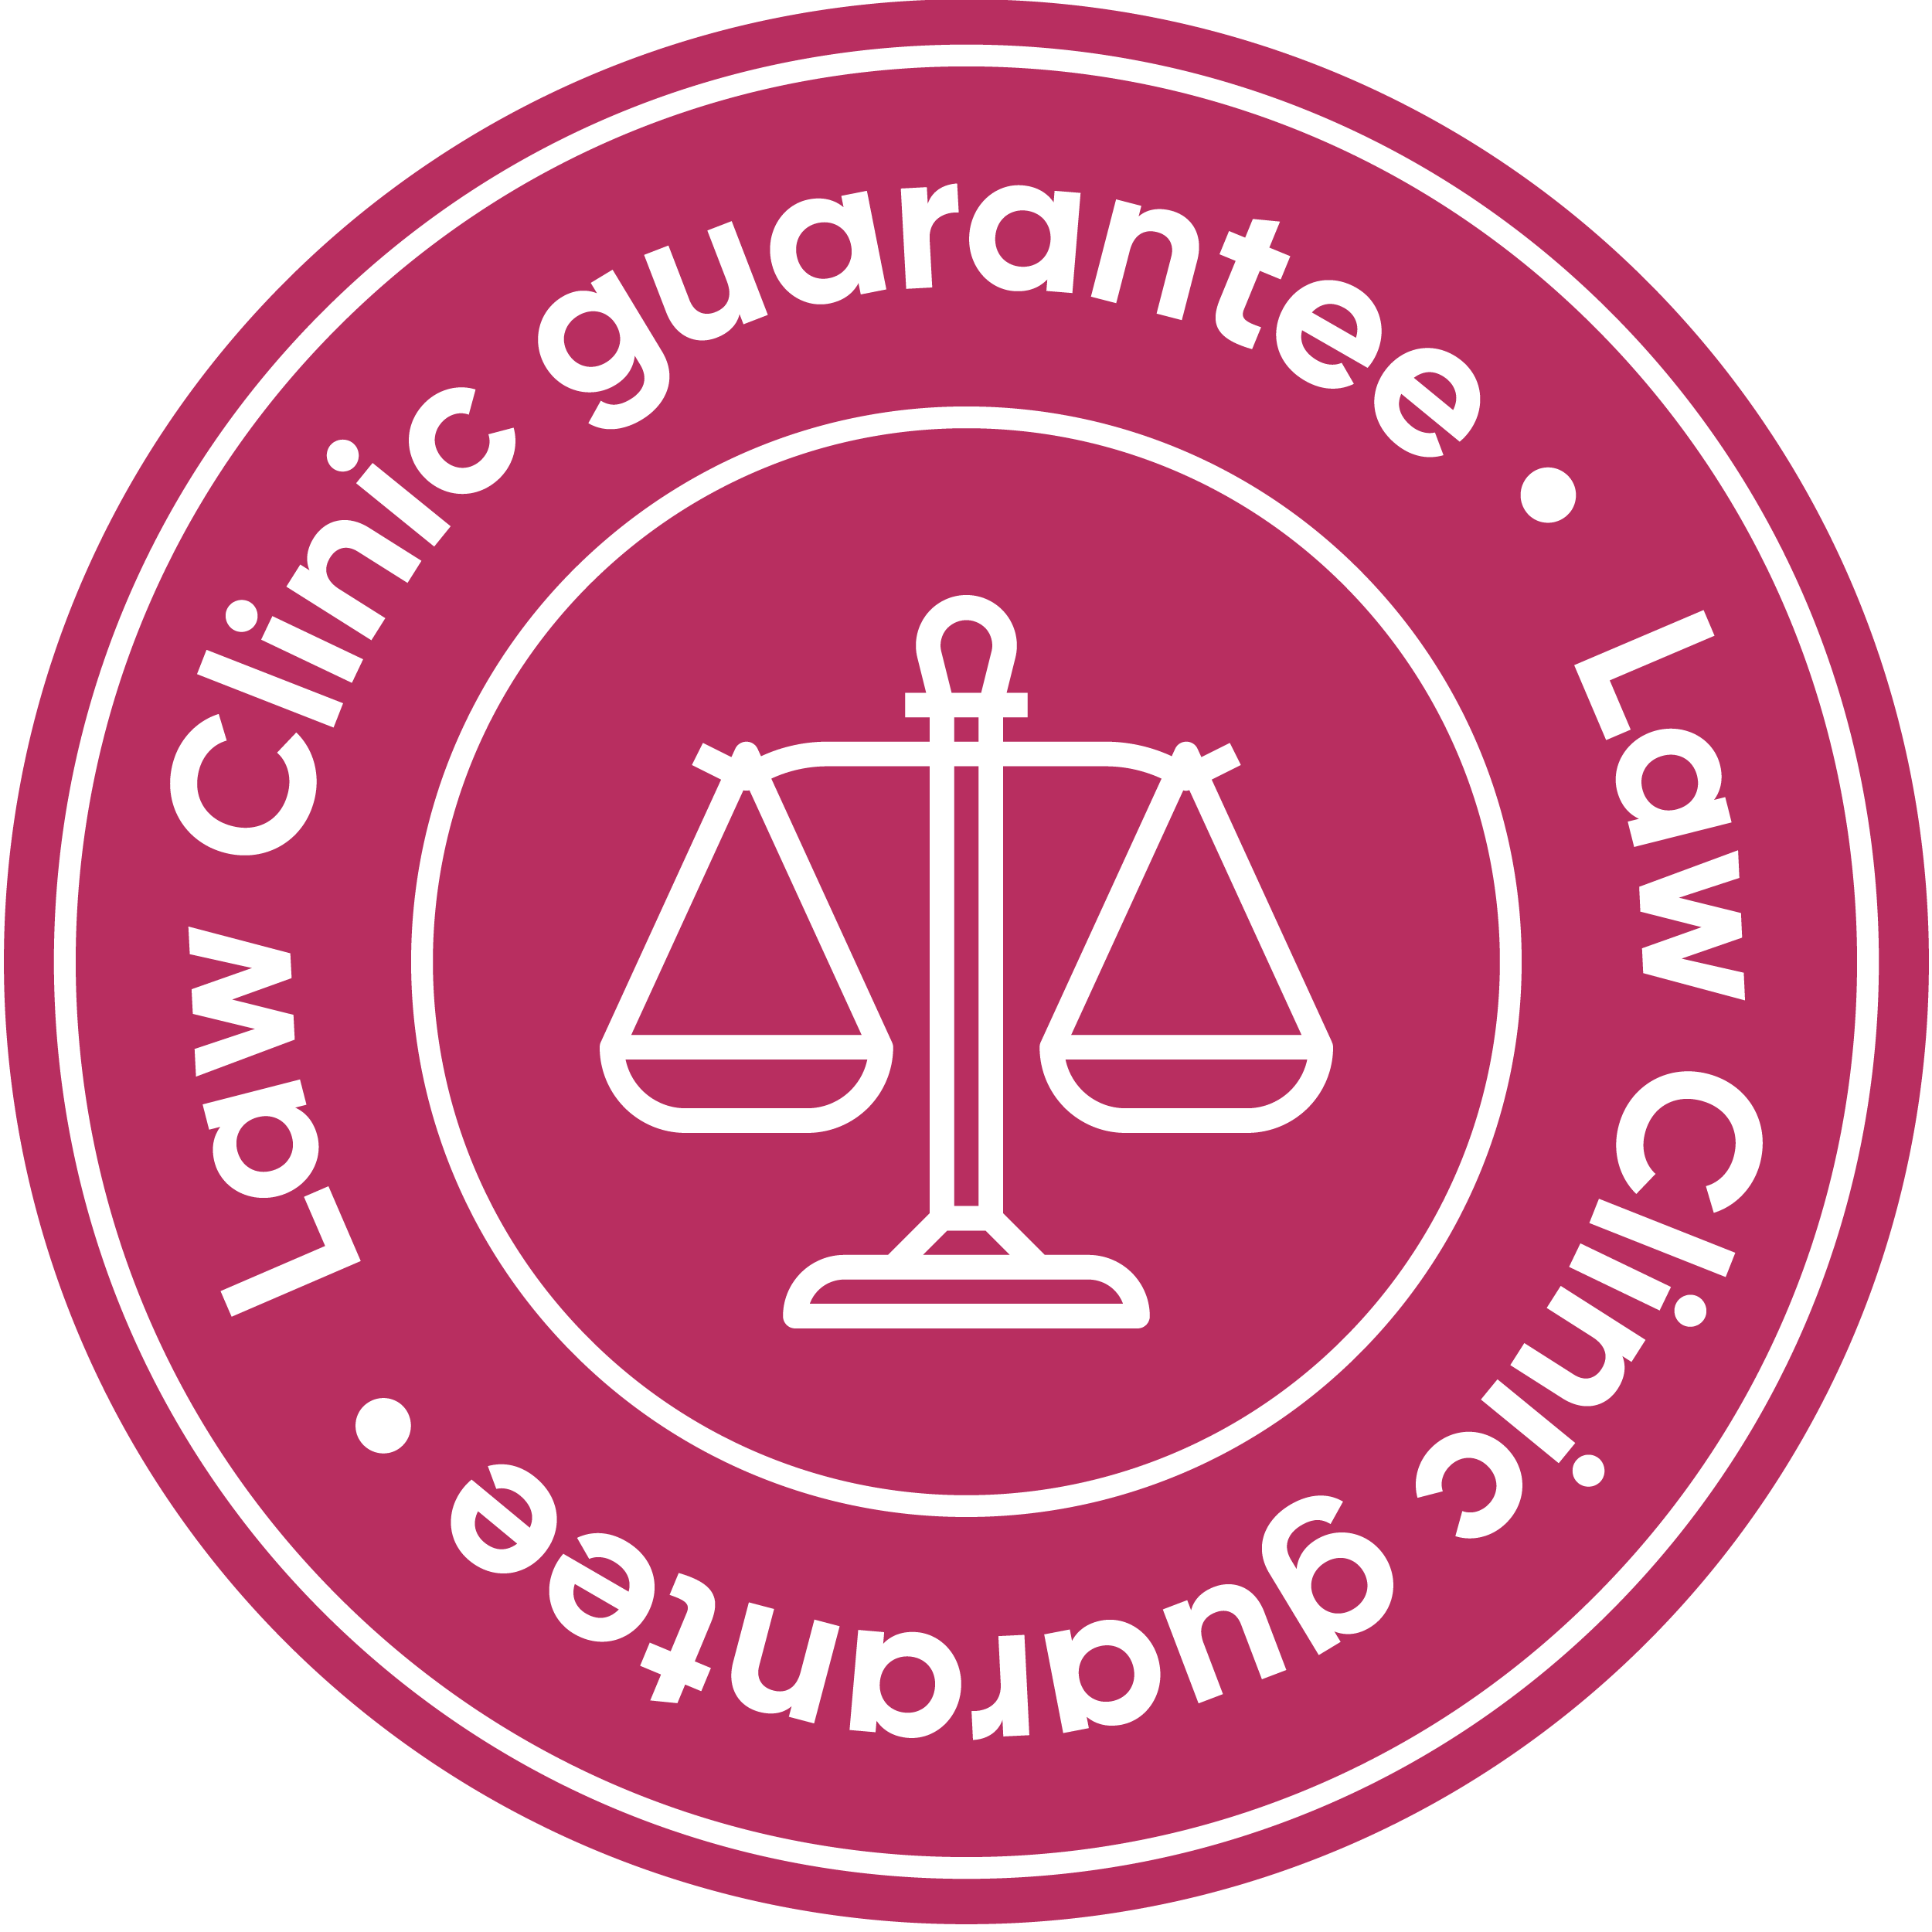 Legal Advice CLinic Approved